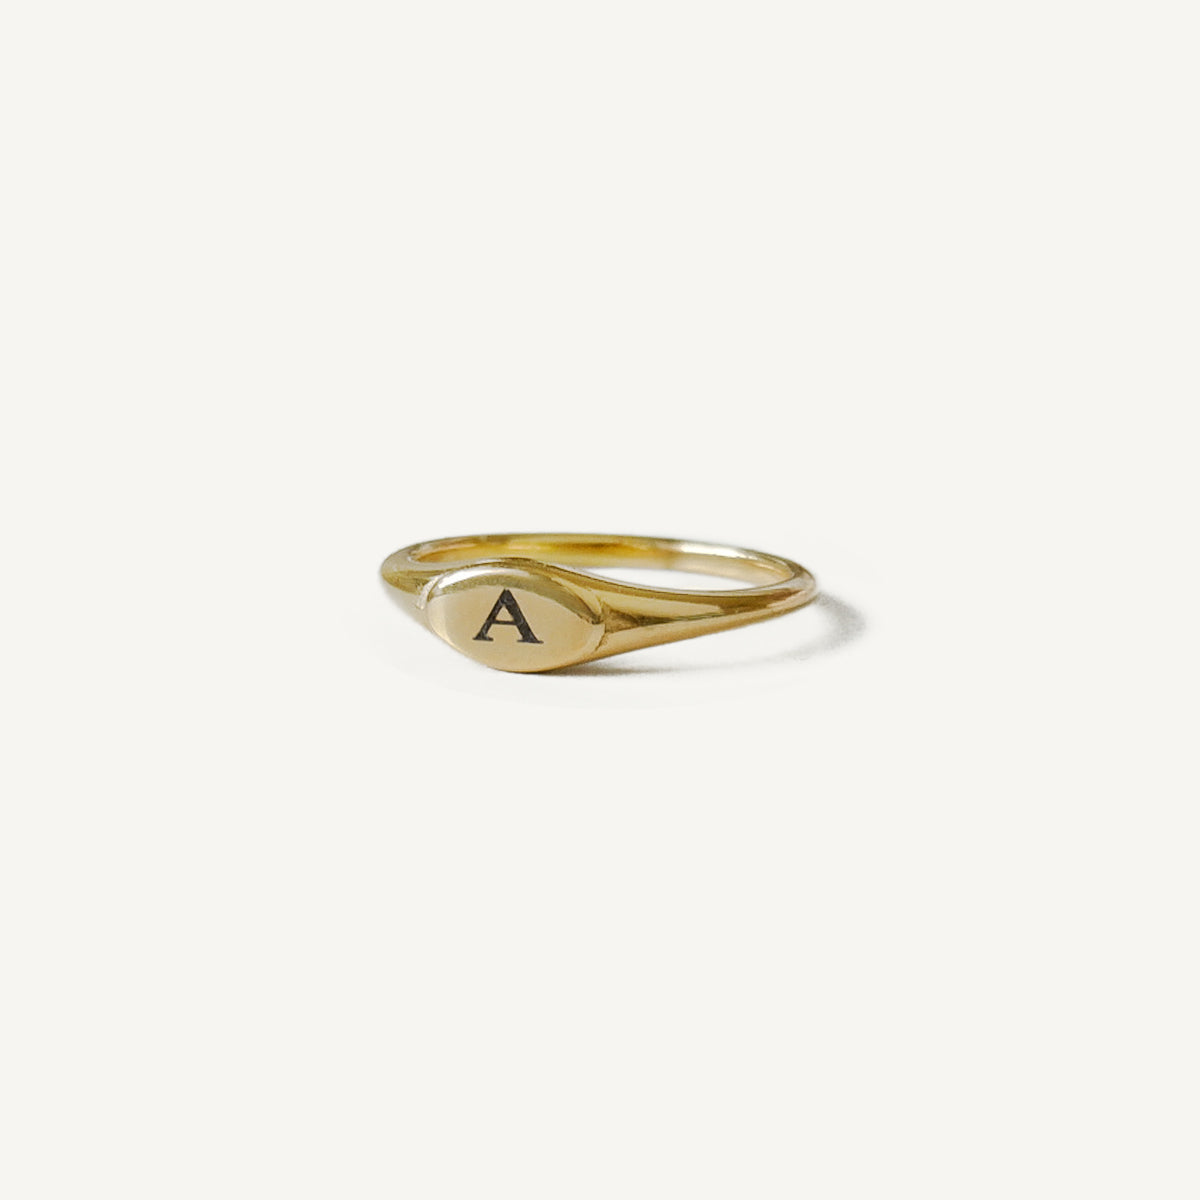 The Engraved Minimal Oval Signet Ring